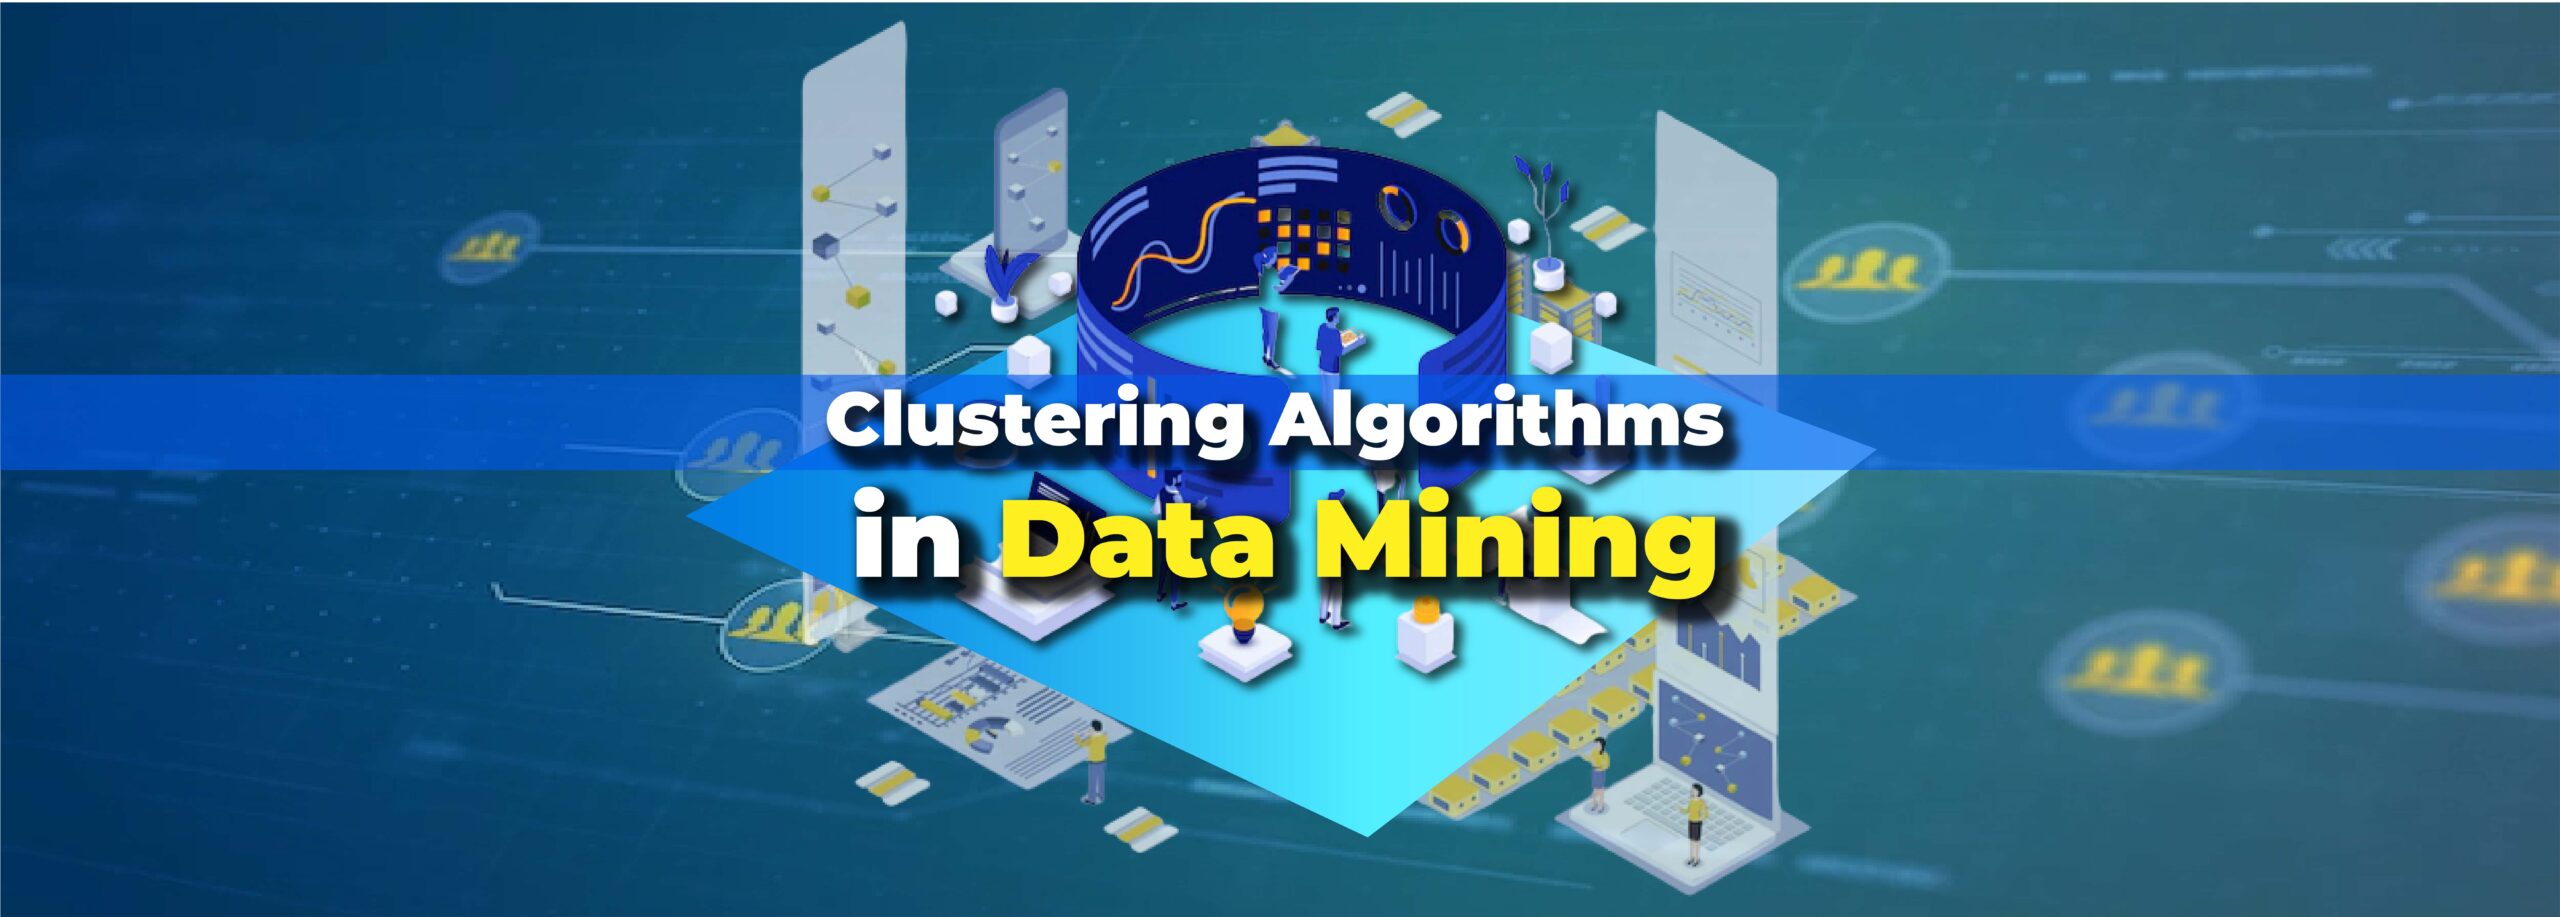 Clustering Algorithms in Data Mining | Meaning | DataTrained